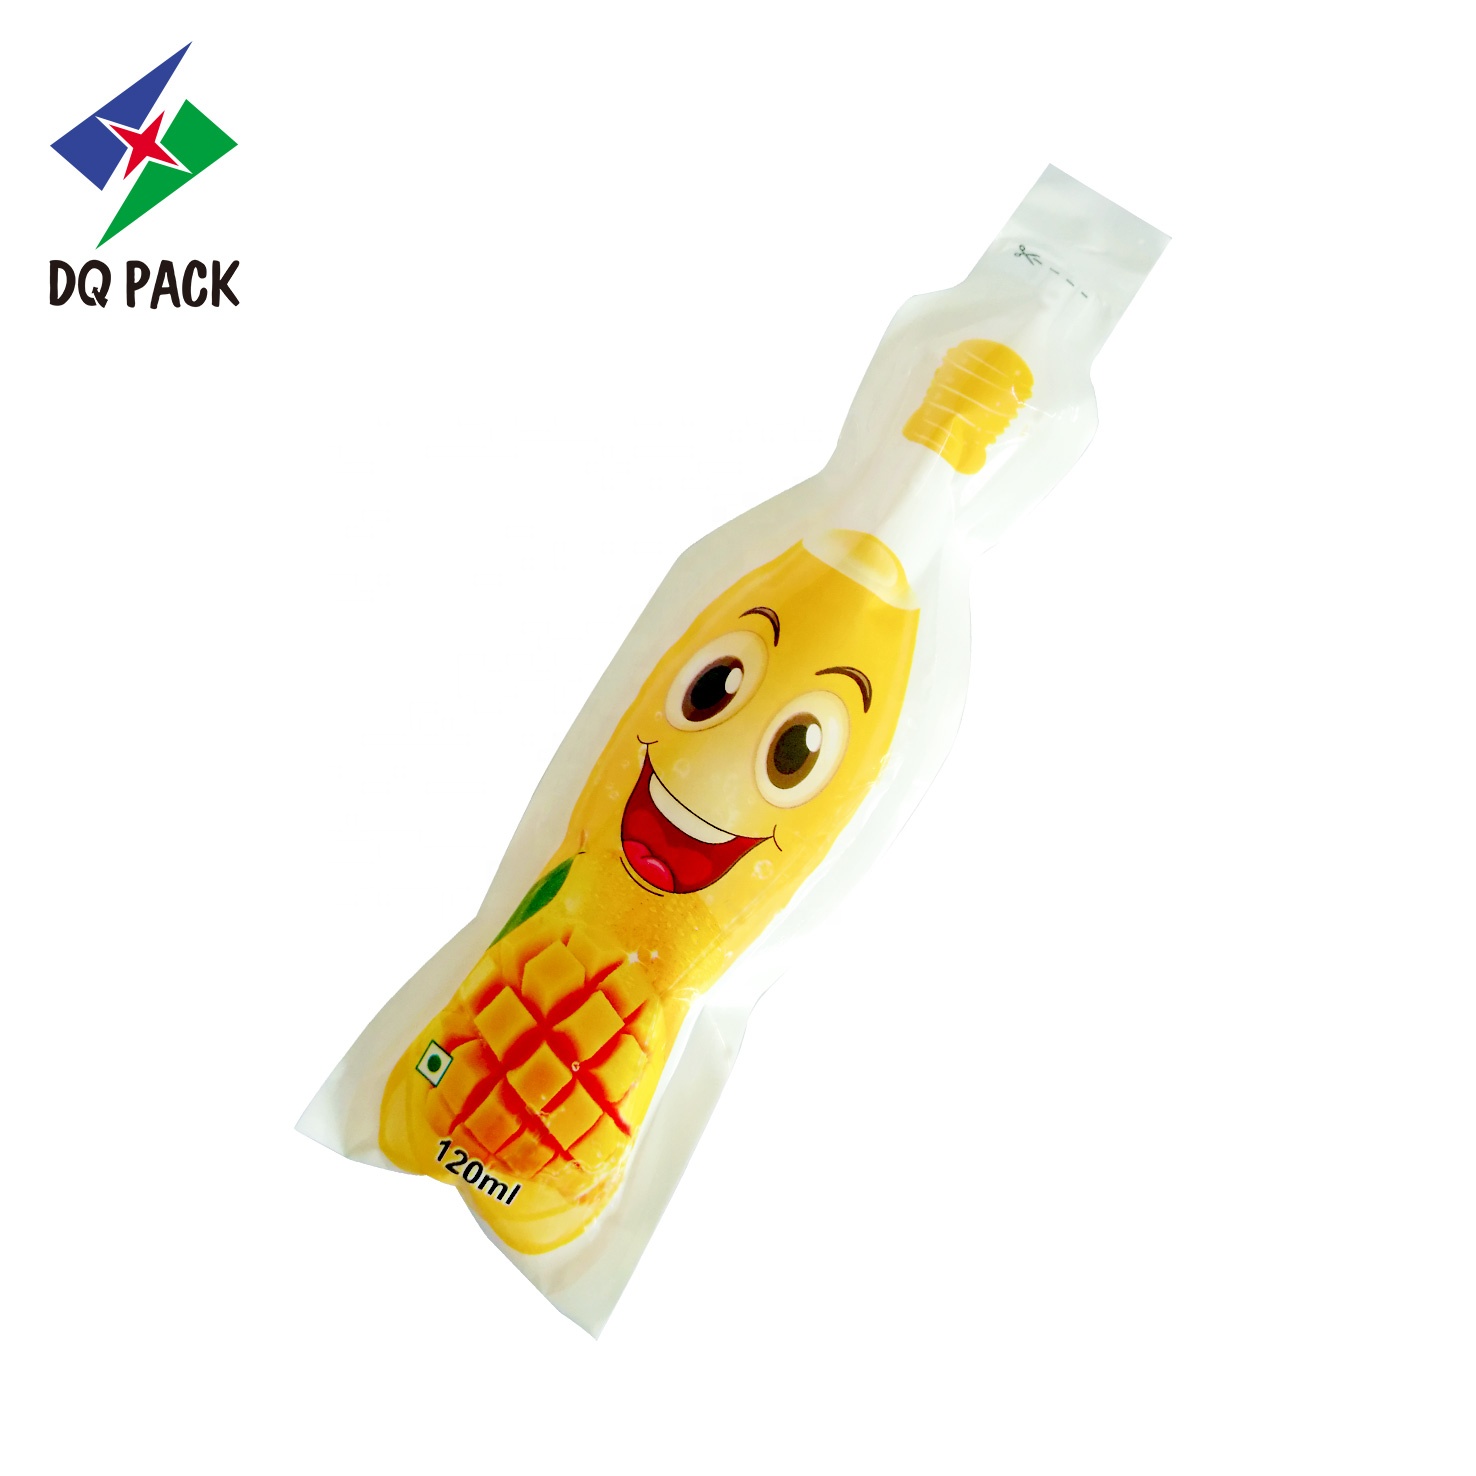 DQ PACK Hot Sale Custom Printed Plastic Mylar Bag Bottle Shape Injection Pouch bag for Jelly juice drink liquid packaging